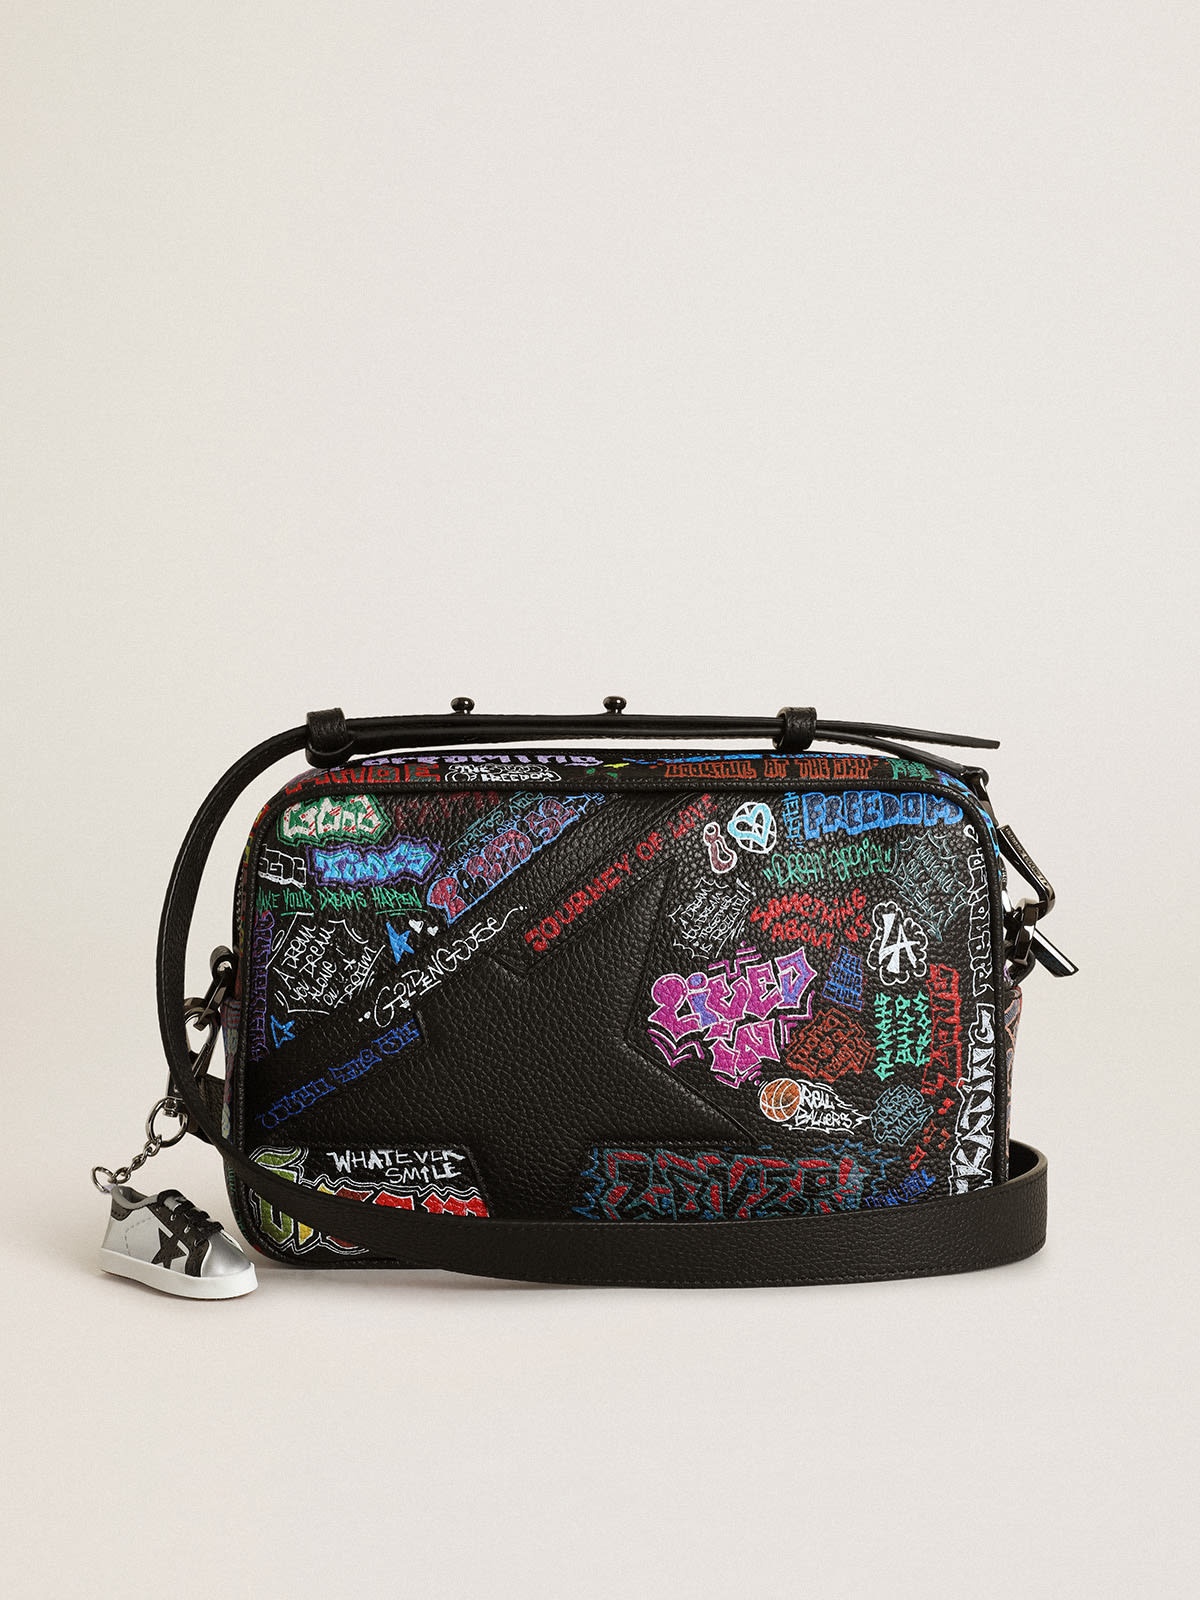 Star Bag in black hammered leather with black leather star and all-over multicolored print - 1